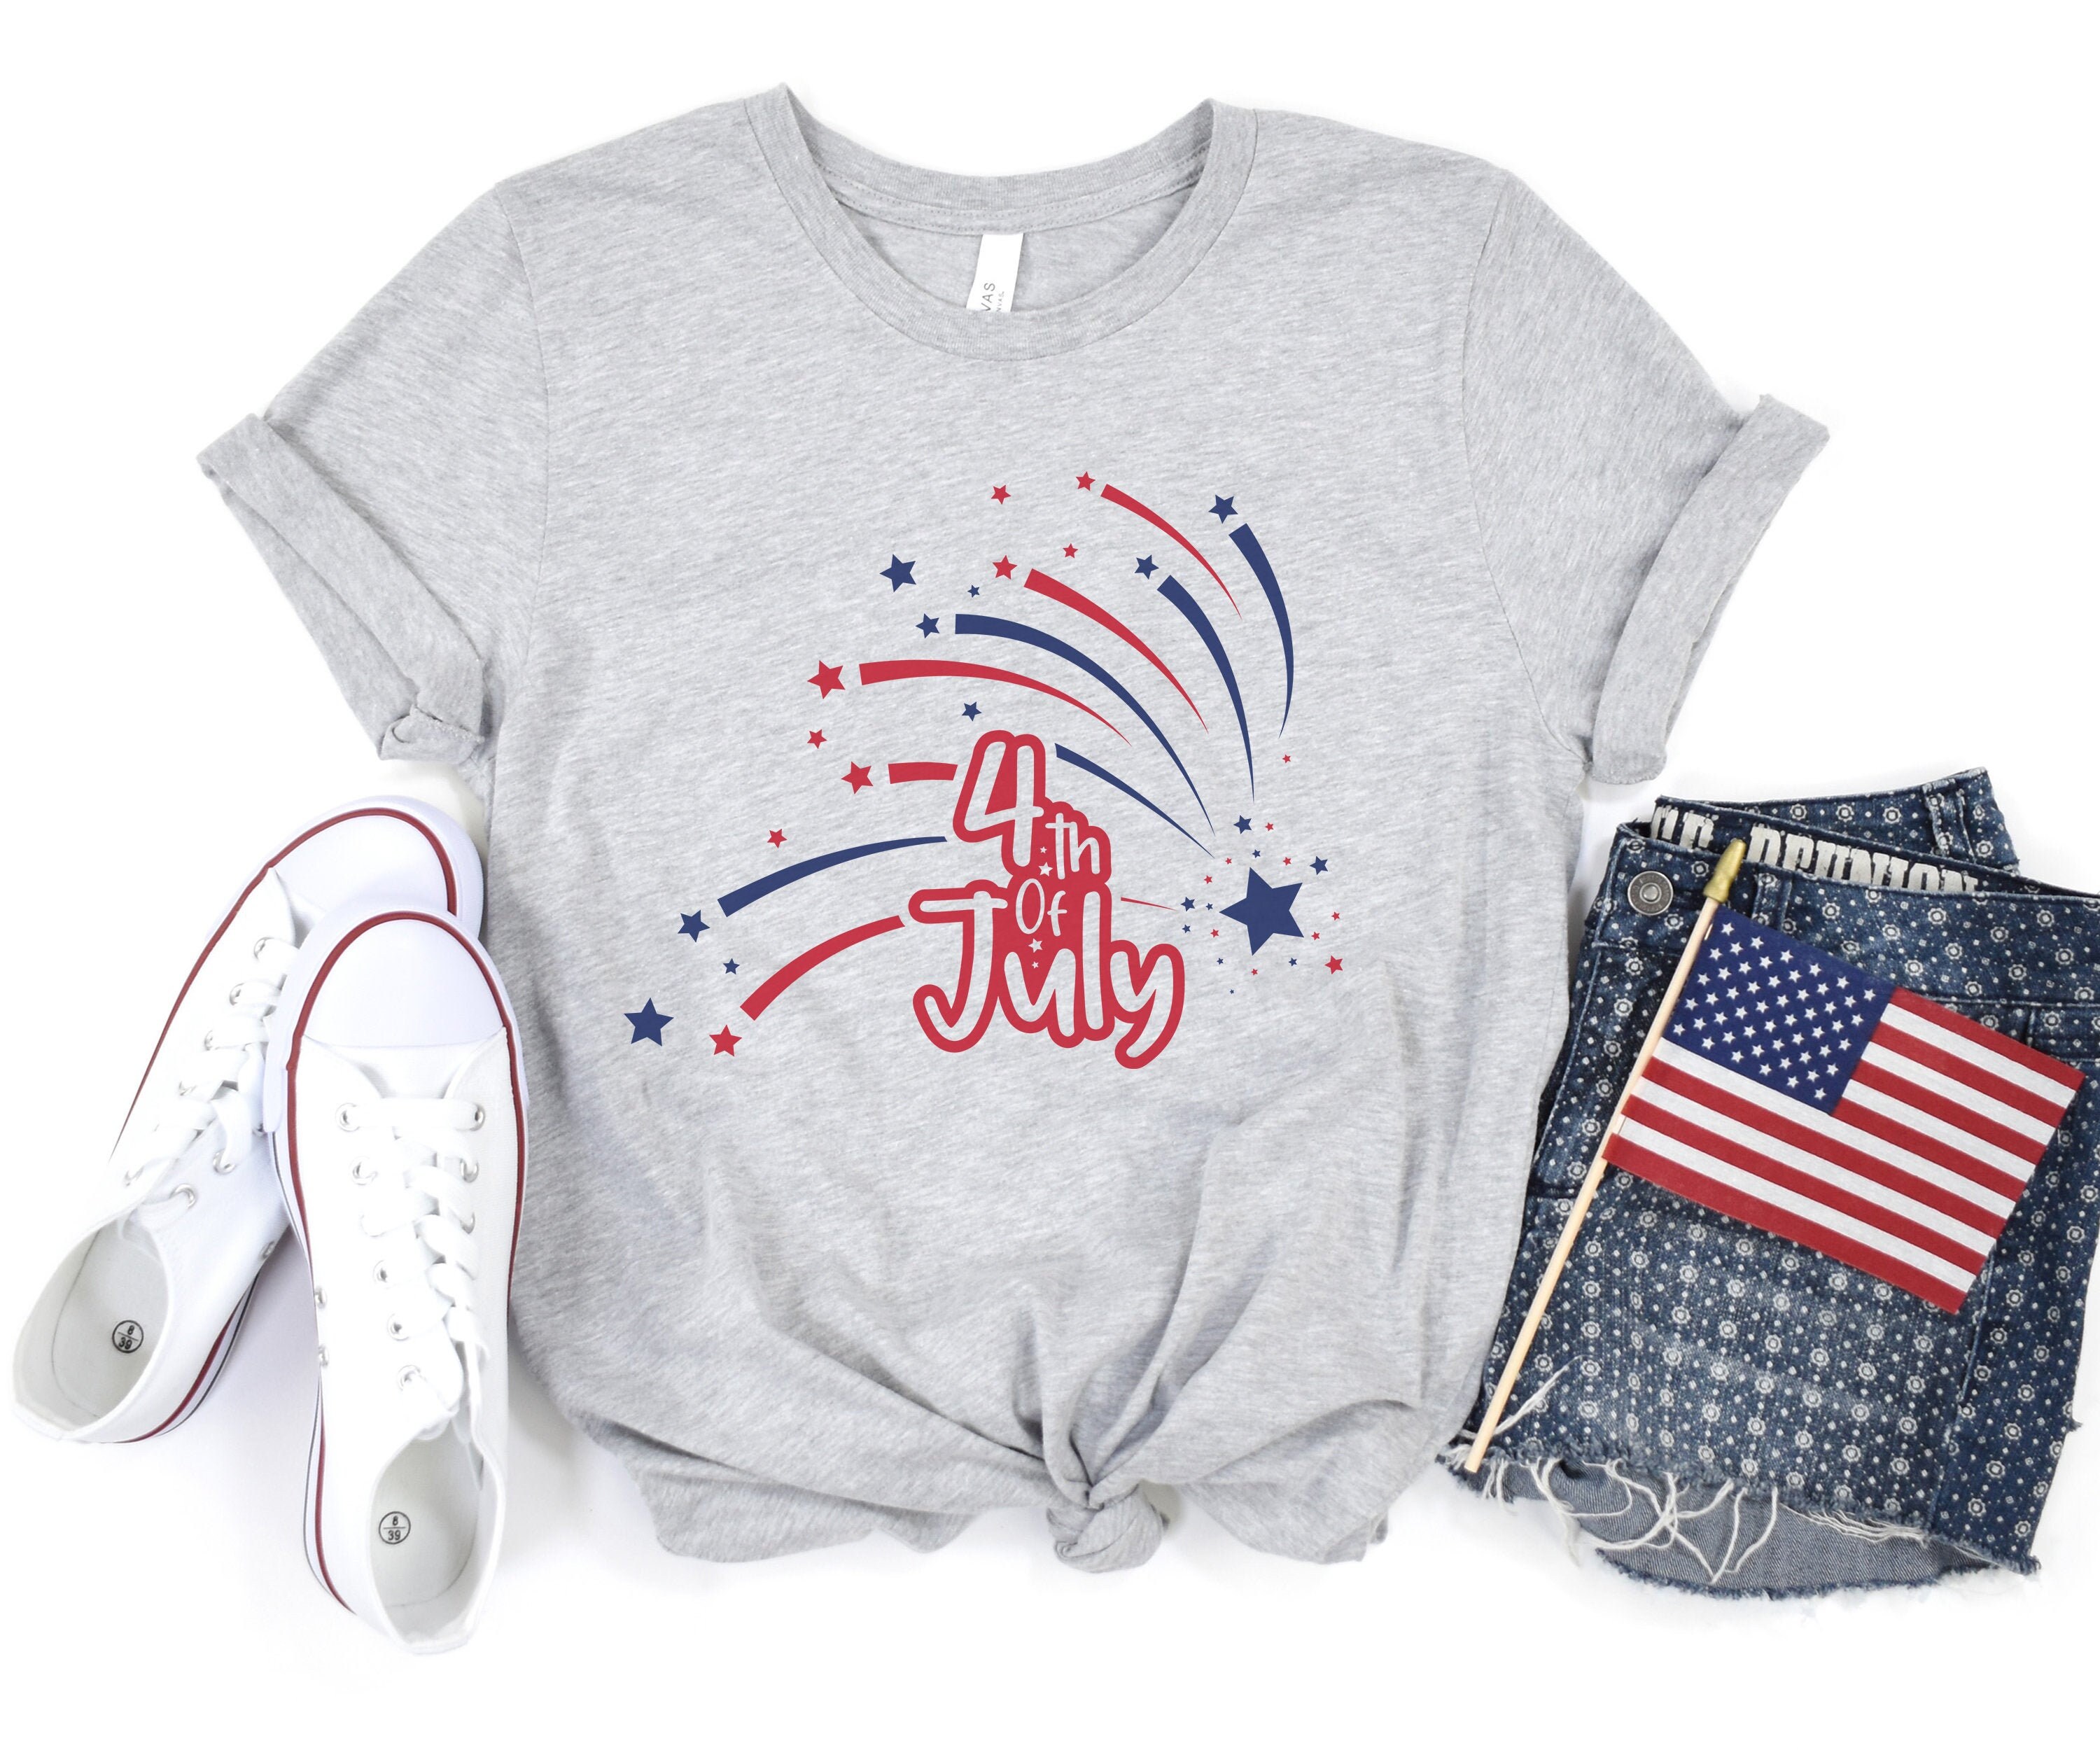 USA Shirt Patriotic Family Shirts Family 4th of July Shirts 4th of July Flag Shirt American Independence Day Family Tee 4th of July